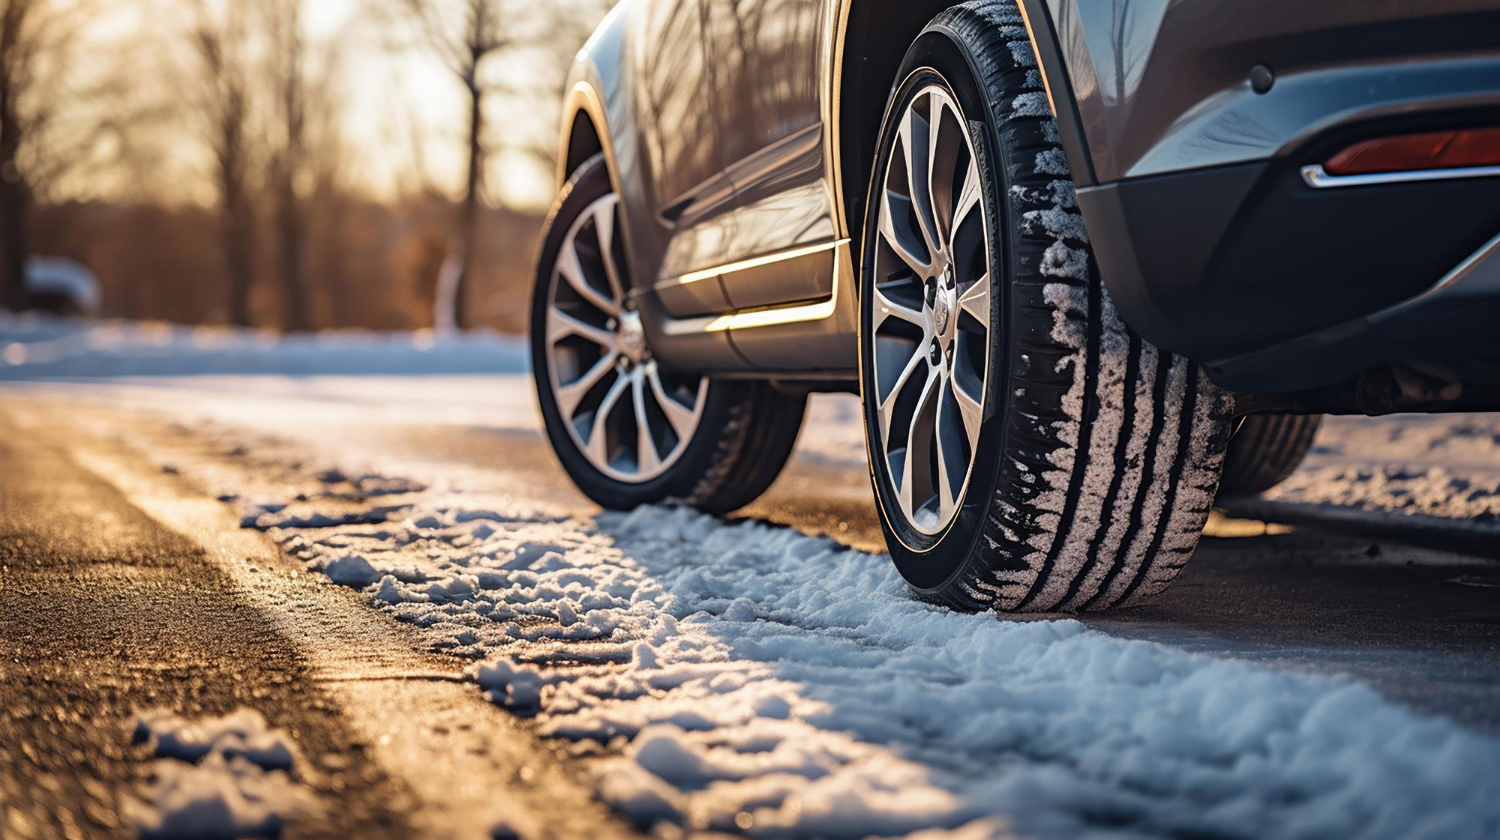 Tires covered in melting snow, parked under the bright, warming sun as the seasons transition from winter to spring, symbolizing the renewal and maintenance required for the upcoming warmer months.